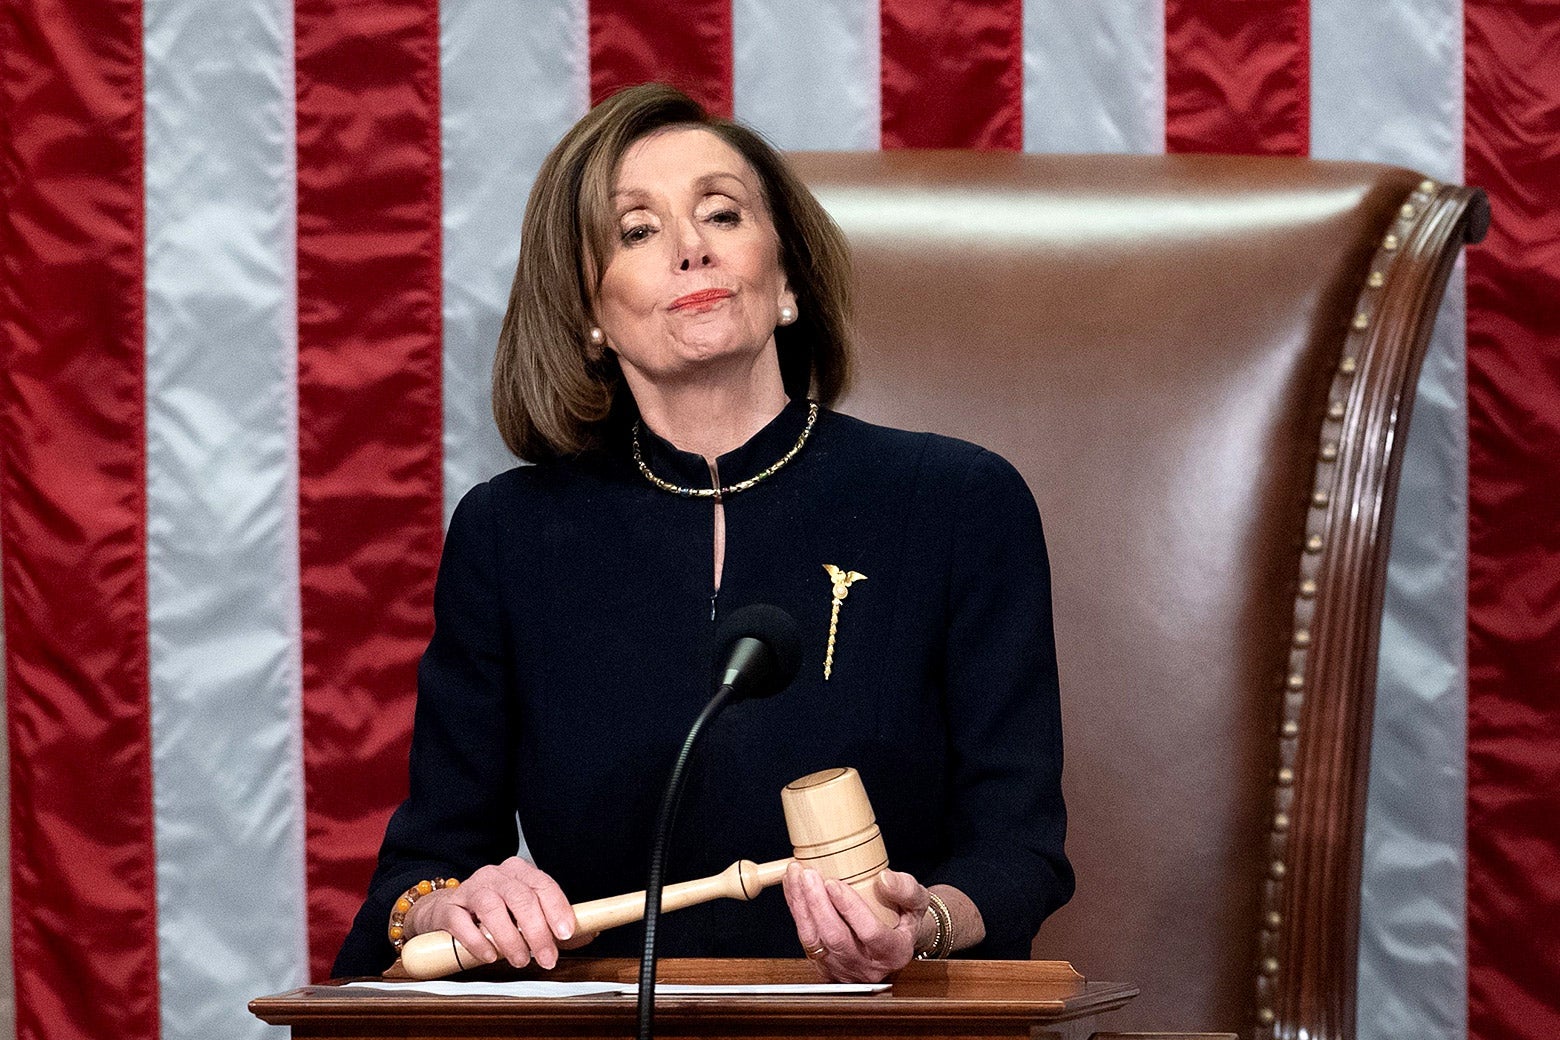 Nancy Pelosi holds a gavel while standing at a podium in front of an American flag.